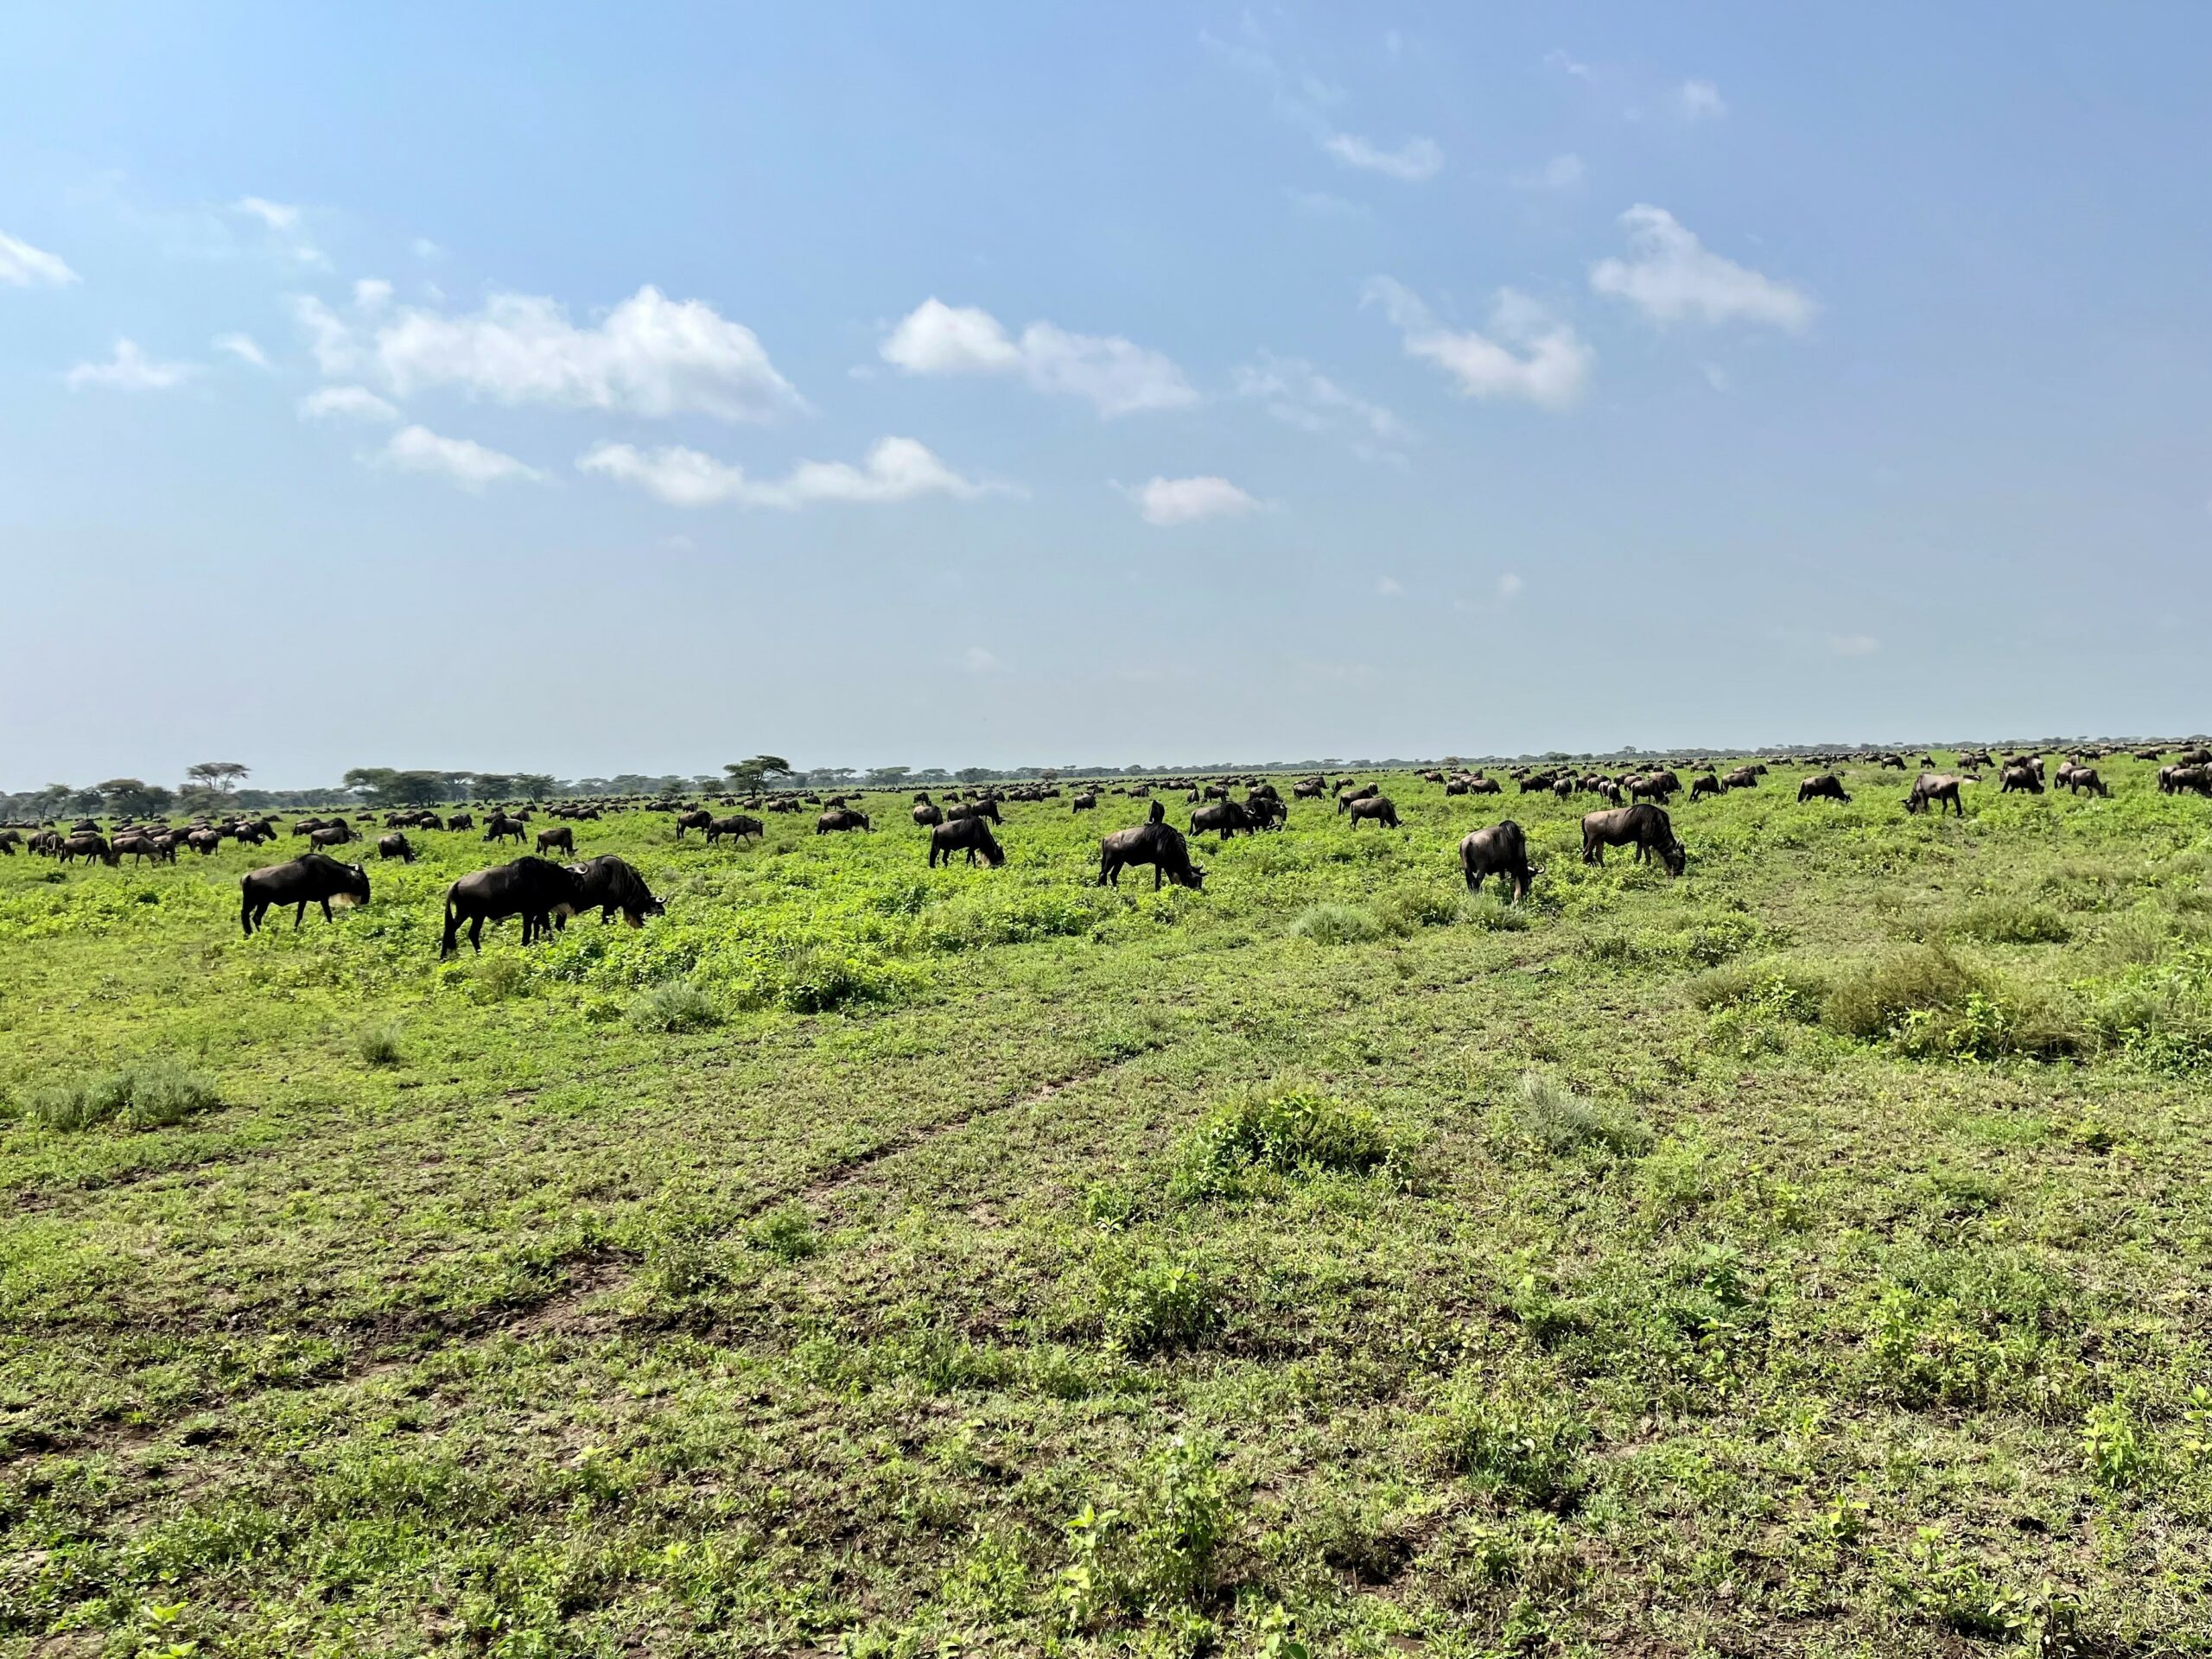 A view of the Southern Serengeti, during wildebeest migration.